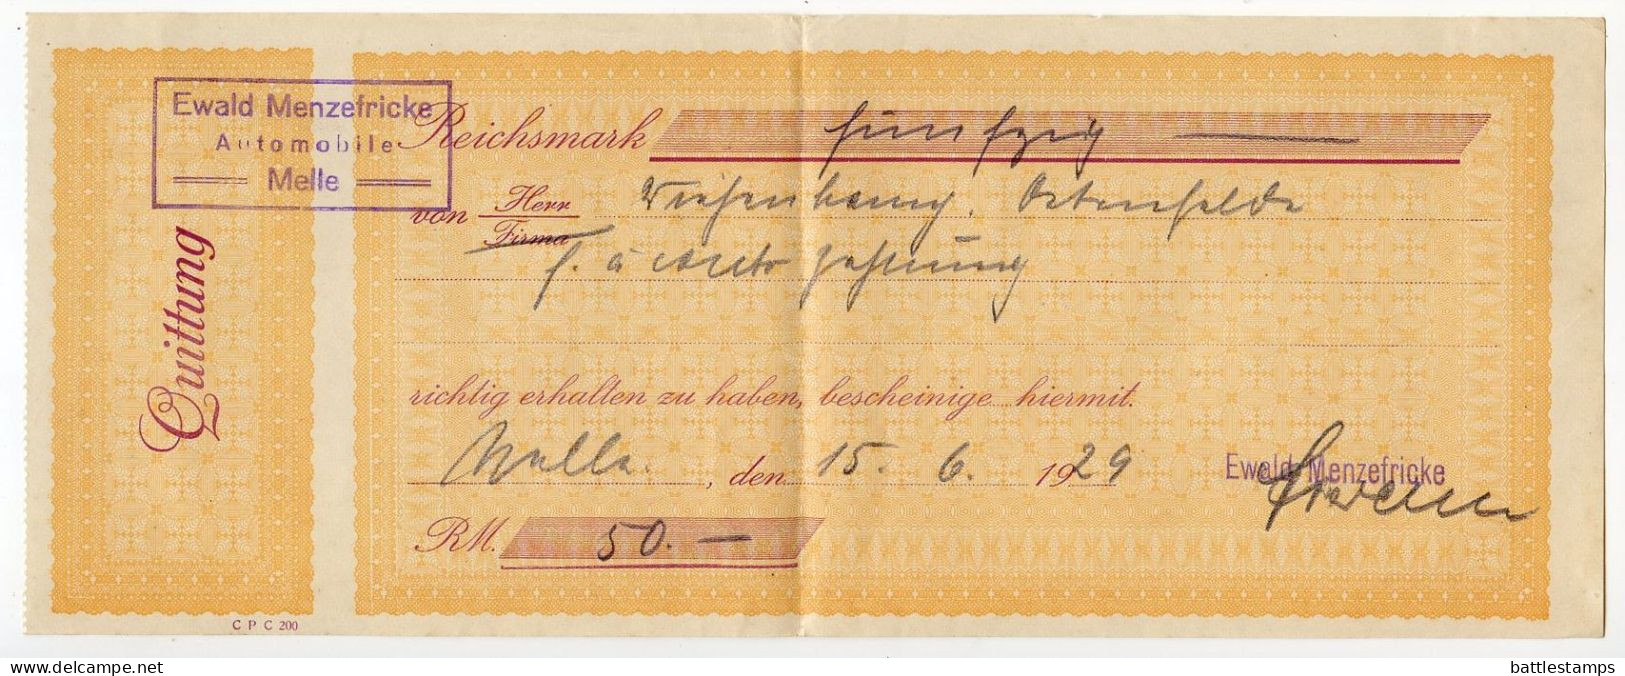 Germany 1929 Cover w/ Invoices & Receipts; Melle - Ewald Menzefricke, Automobile; 15pf. President Hindenburg